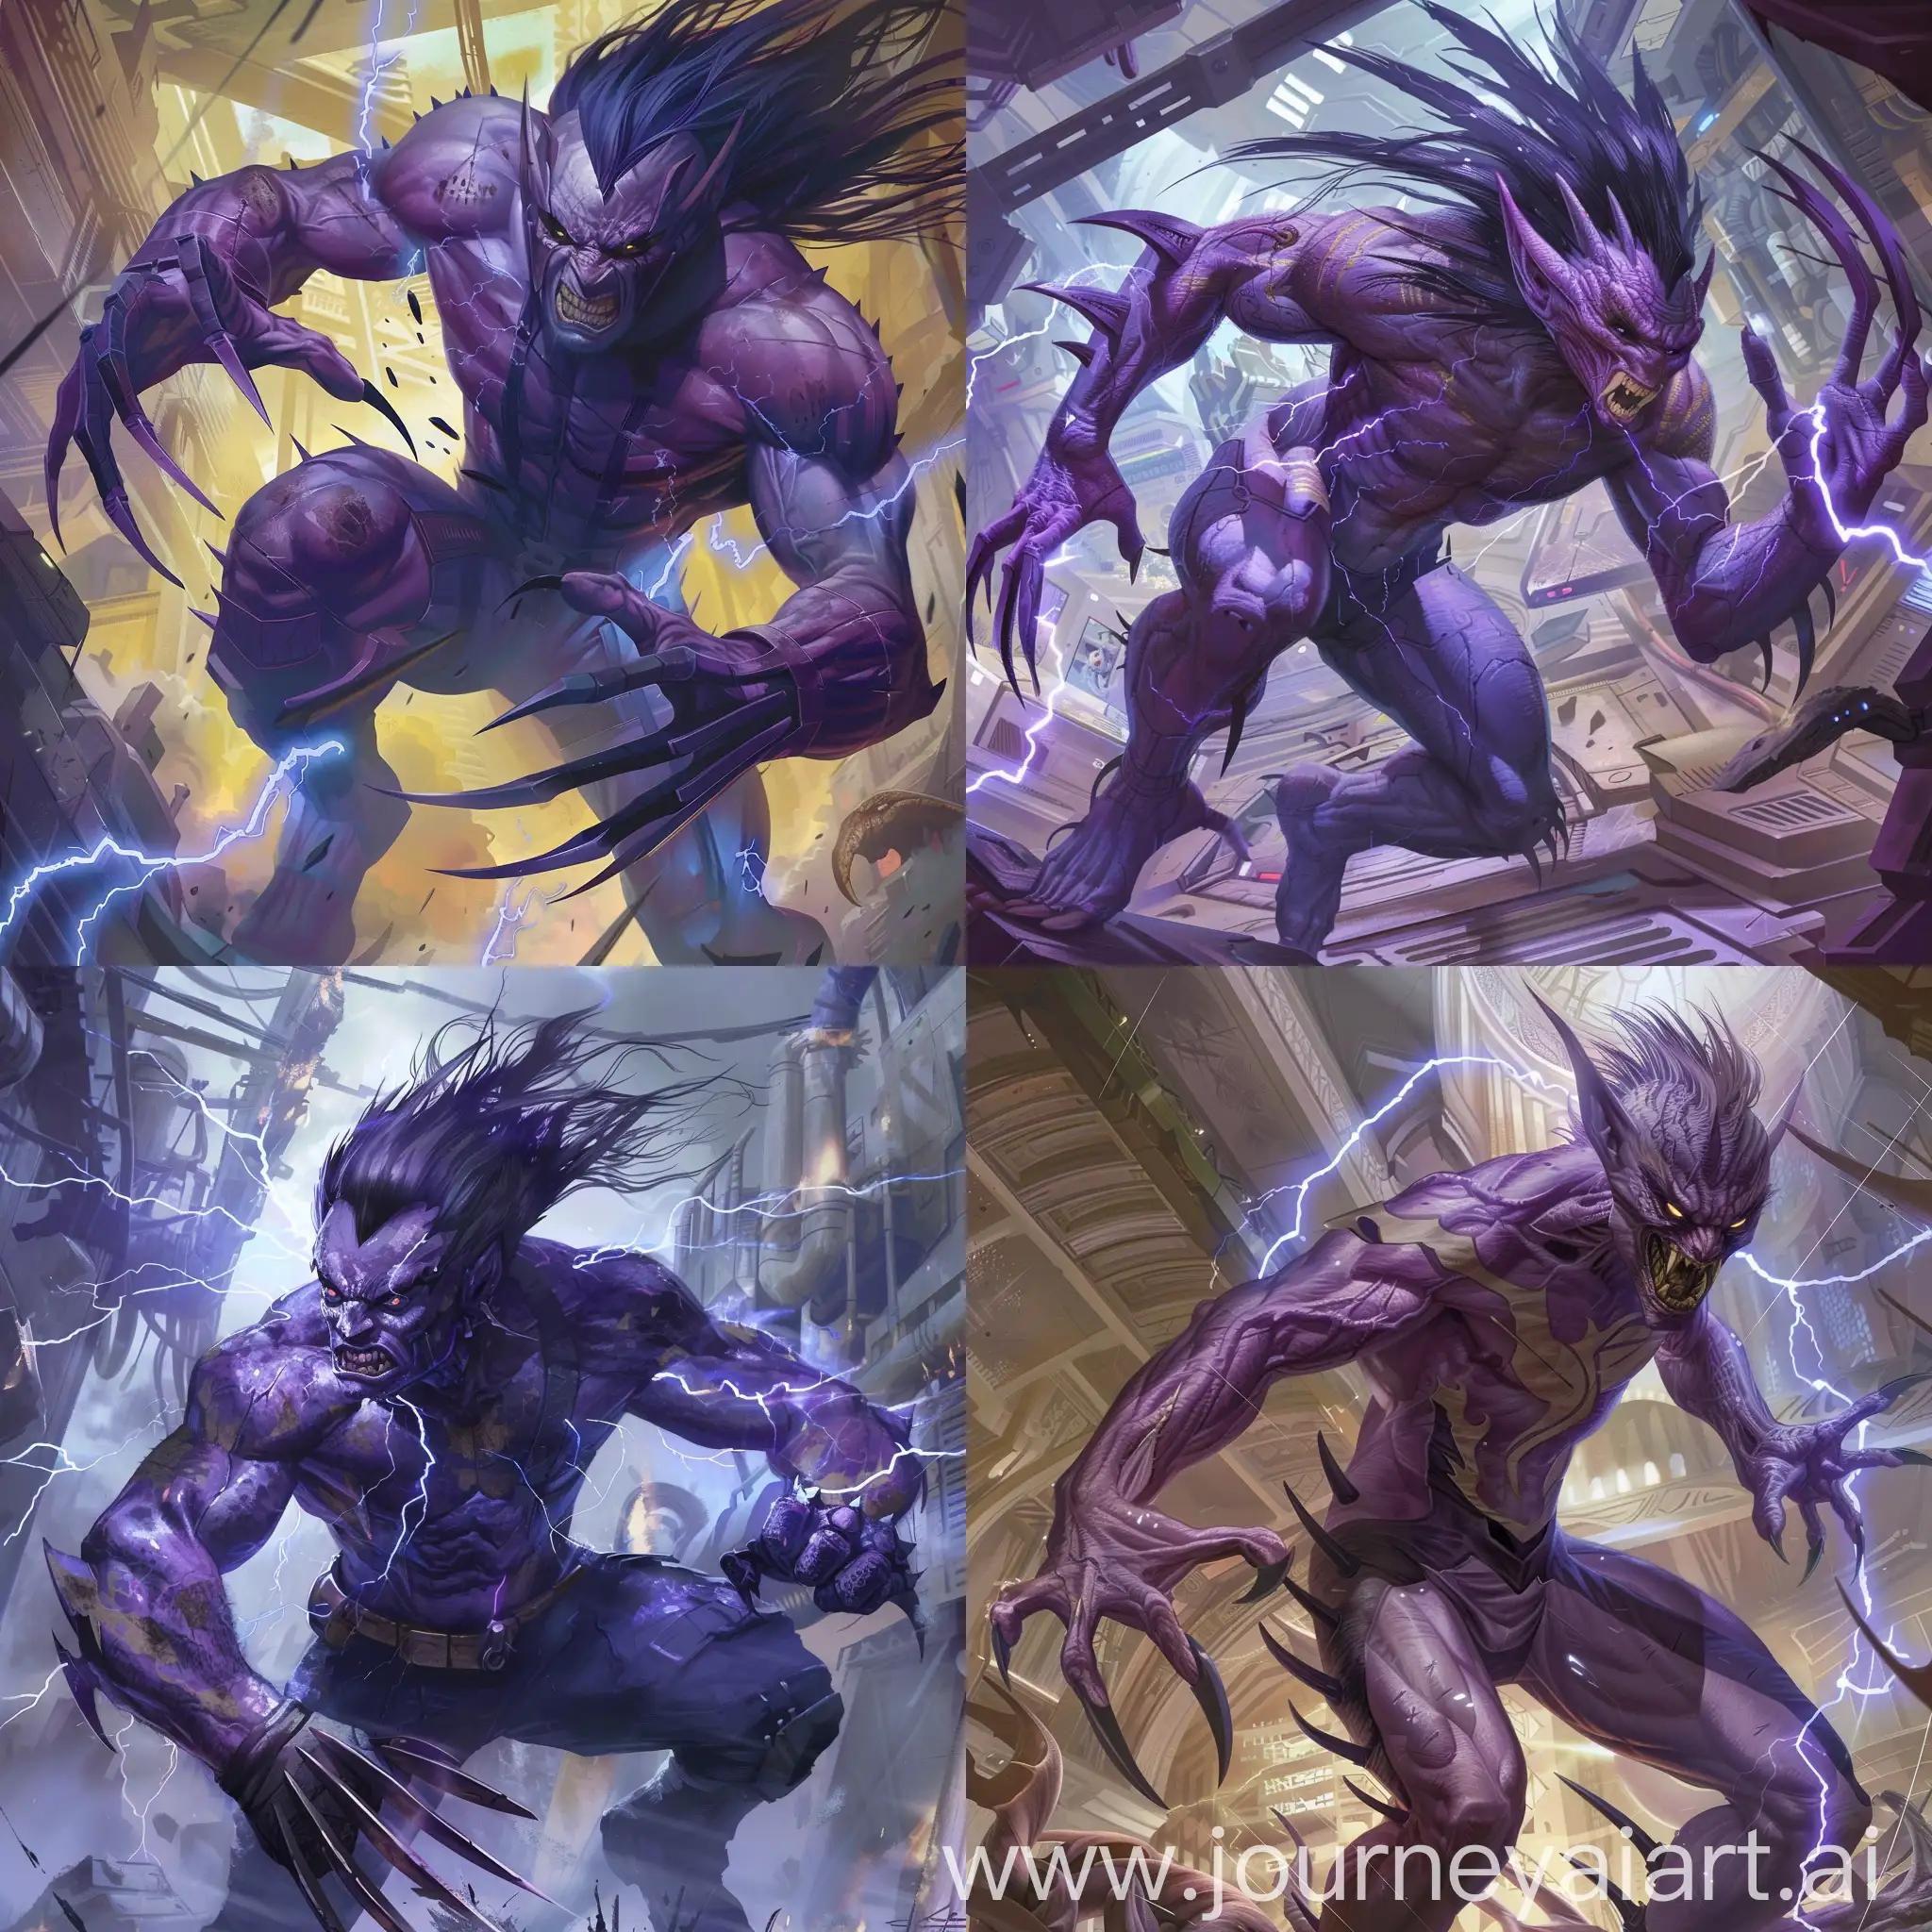 Create an awe-inspiring digital painting of a powerful lavender colored male humanoid with long sharp claws. The background is a fantasy world with a hint of dystopian atmosphere. The  the humanoid is striking a fierce pose and has lavender colored skin, black eyes, and dark purple hair with lightning pulsing from his sharp claws. He is inspired by Dark Jak from the Jak and Daxter series. The artwork should be rendered in ultra-high 8k resolution to capture the essence of the mighty warrior.
